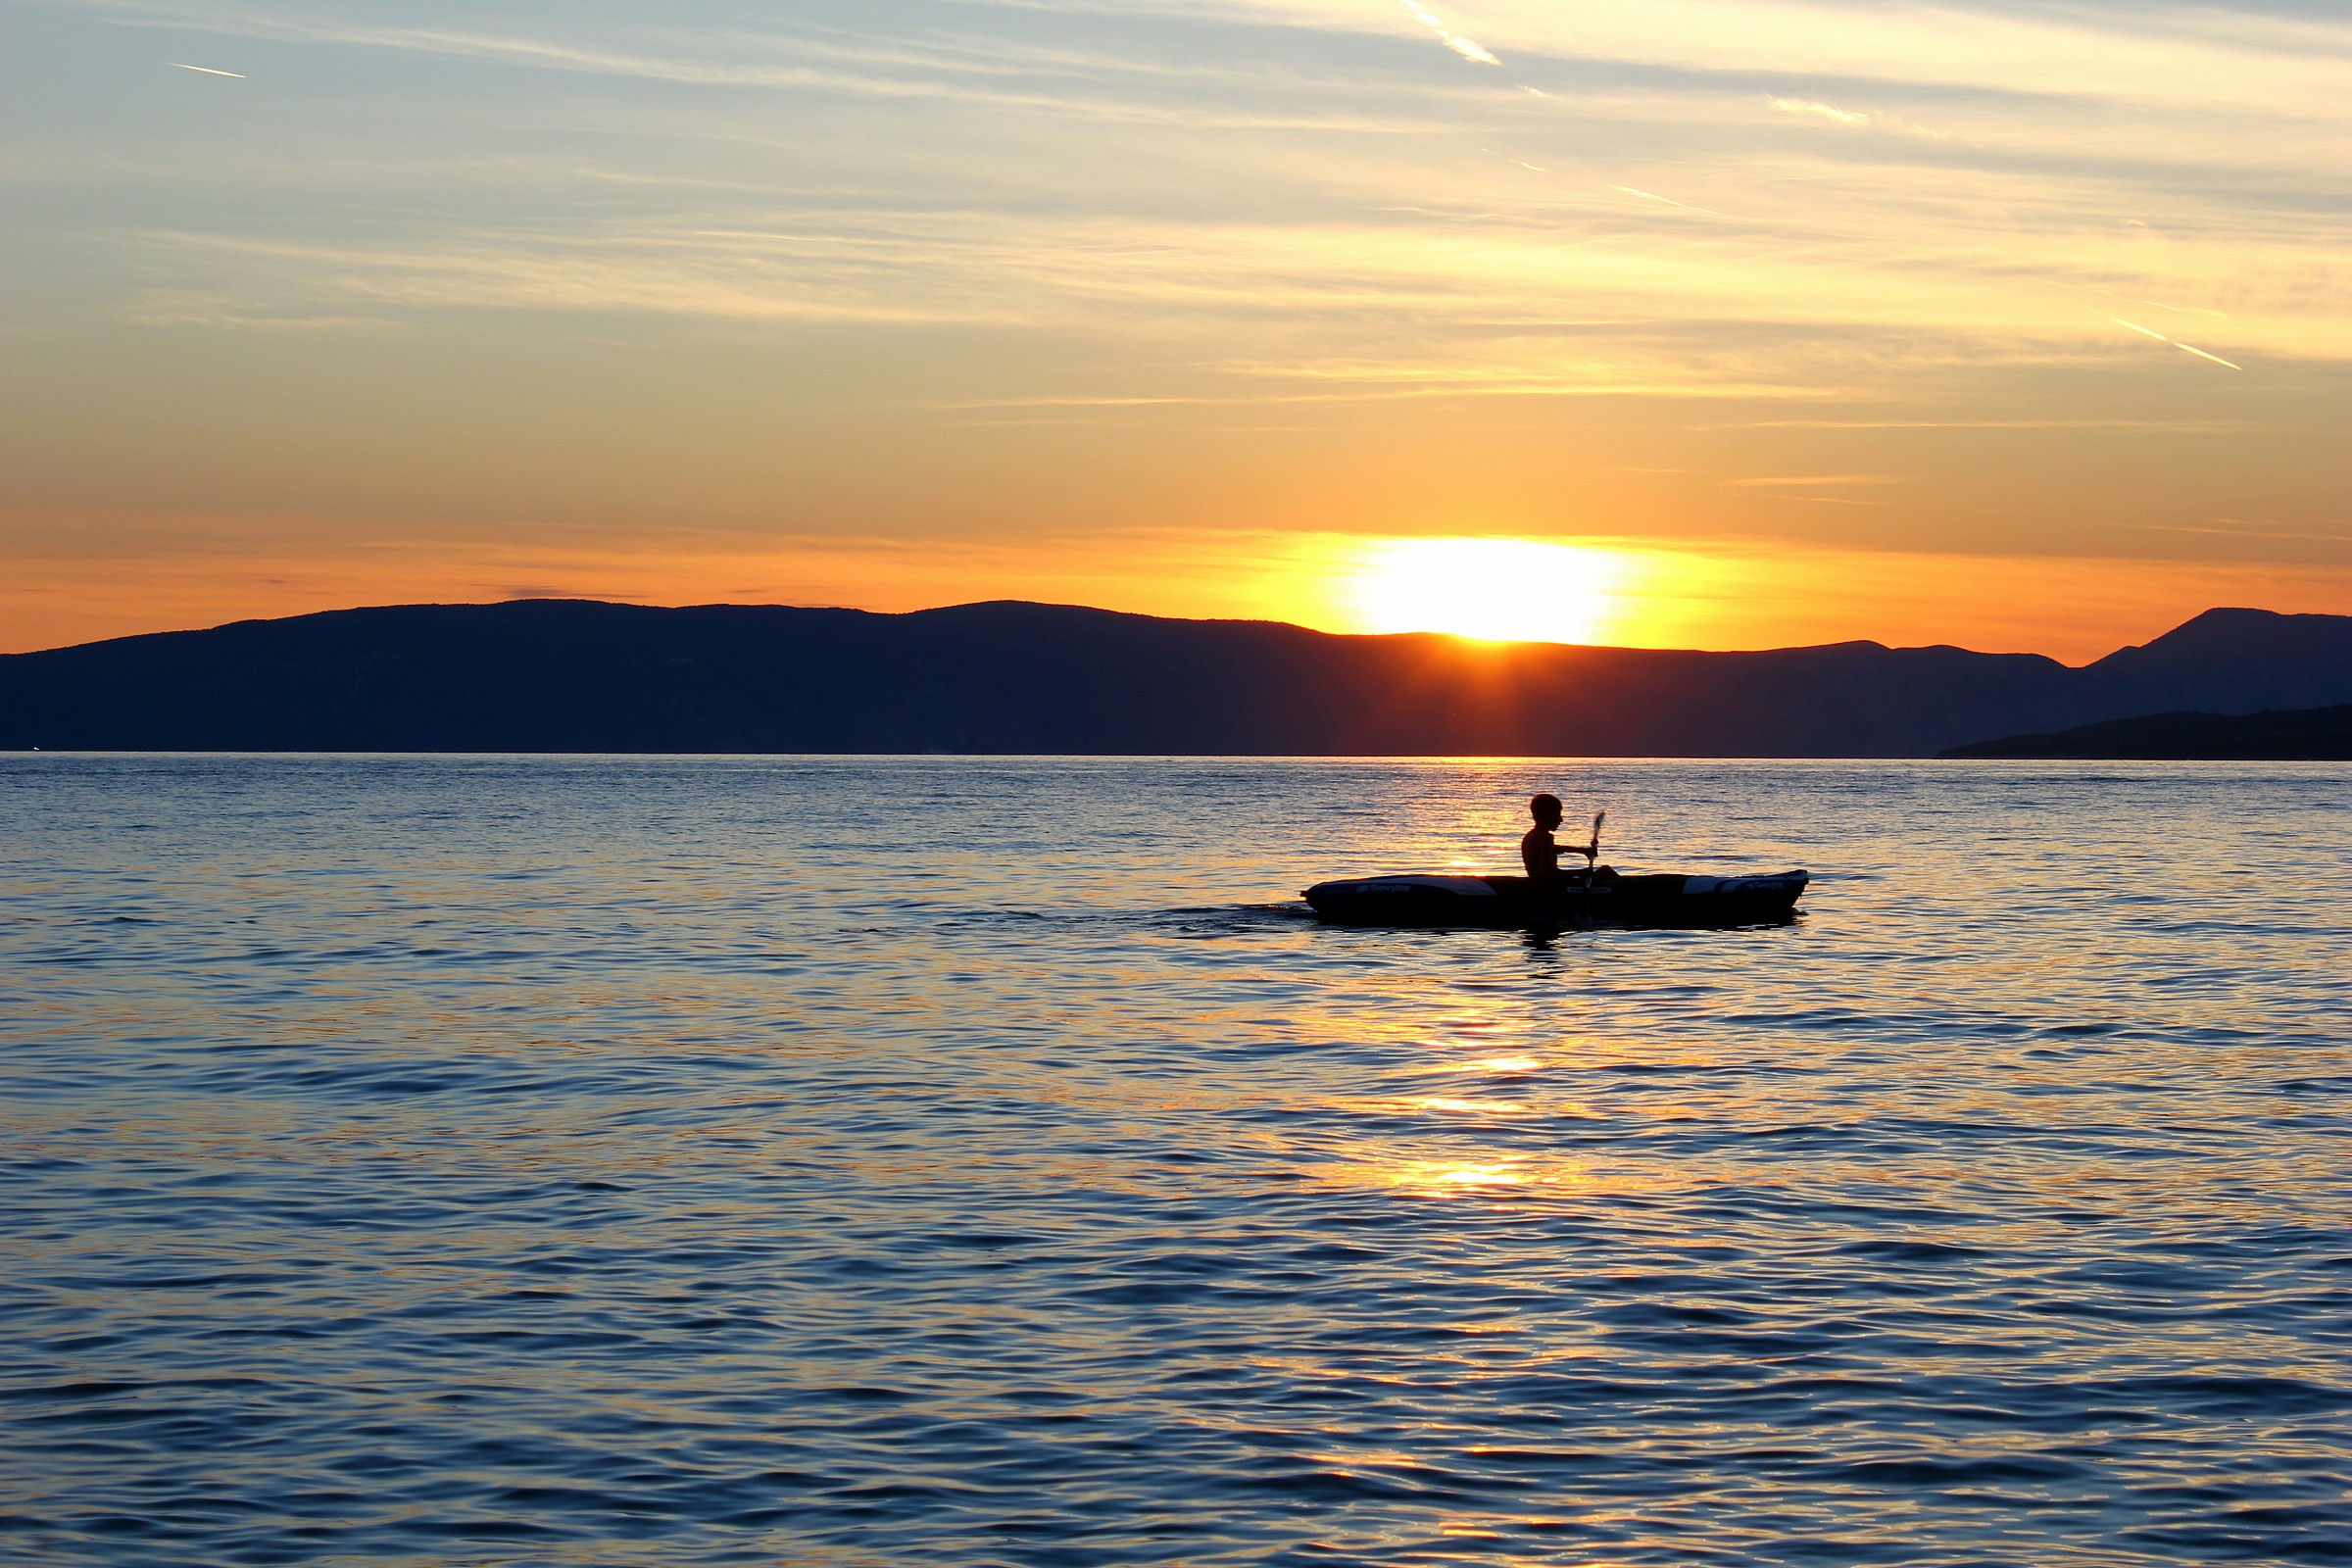 rowing at sunset...